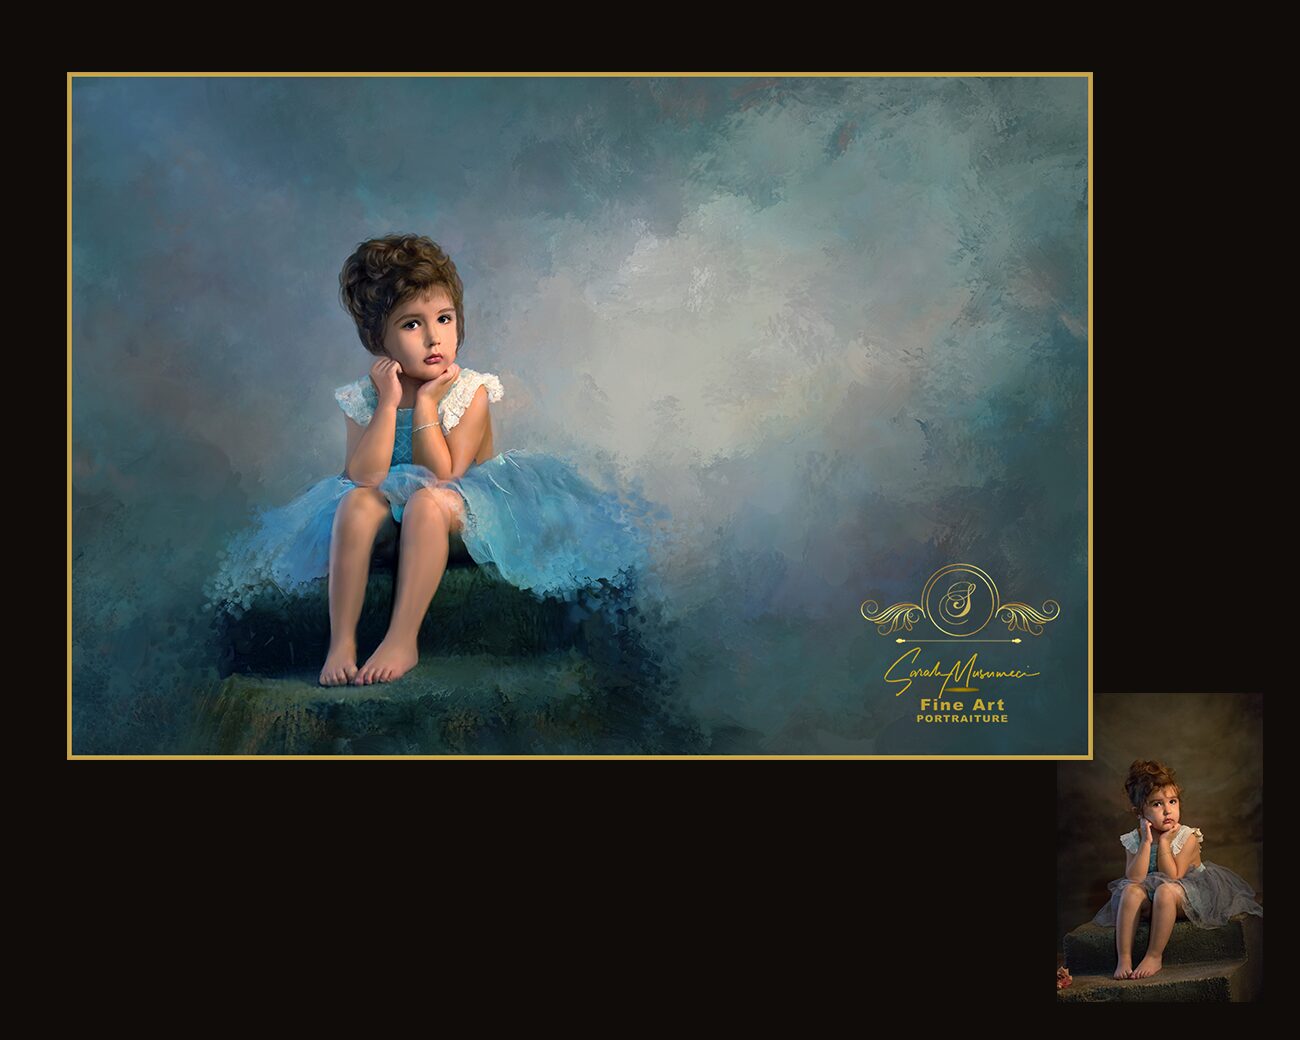 A composite of a child as a painted portrait showing before and after by Sarah Musumeci Fine Art Portraiture